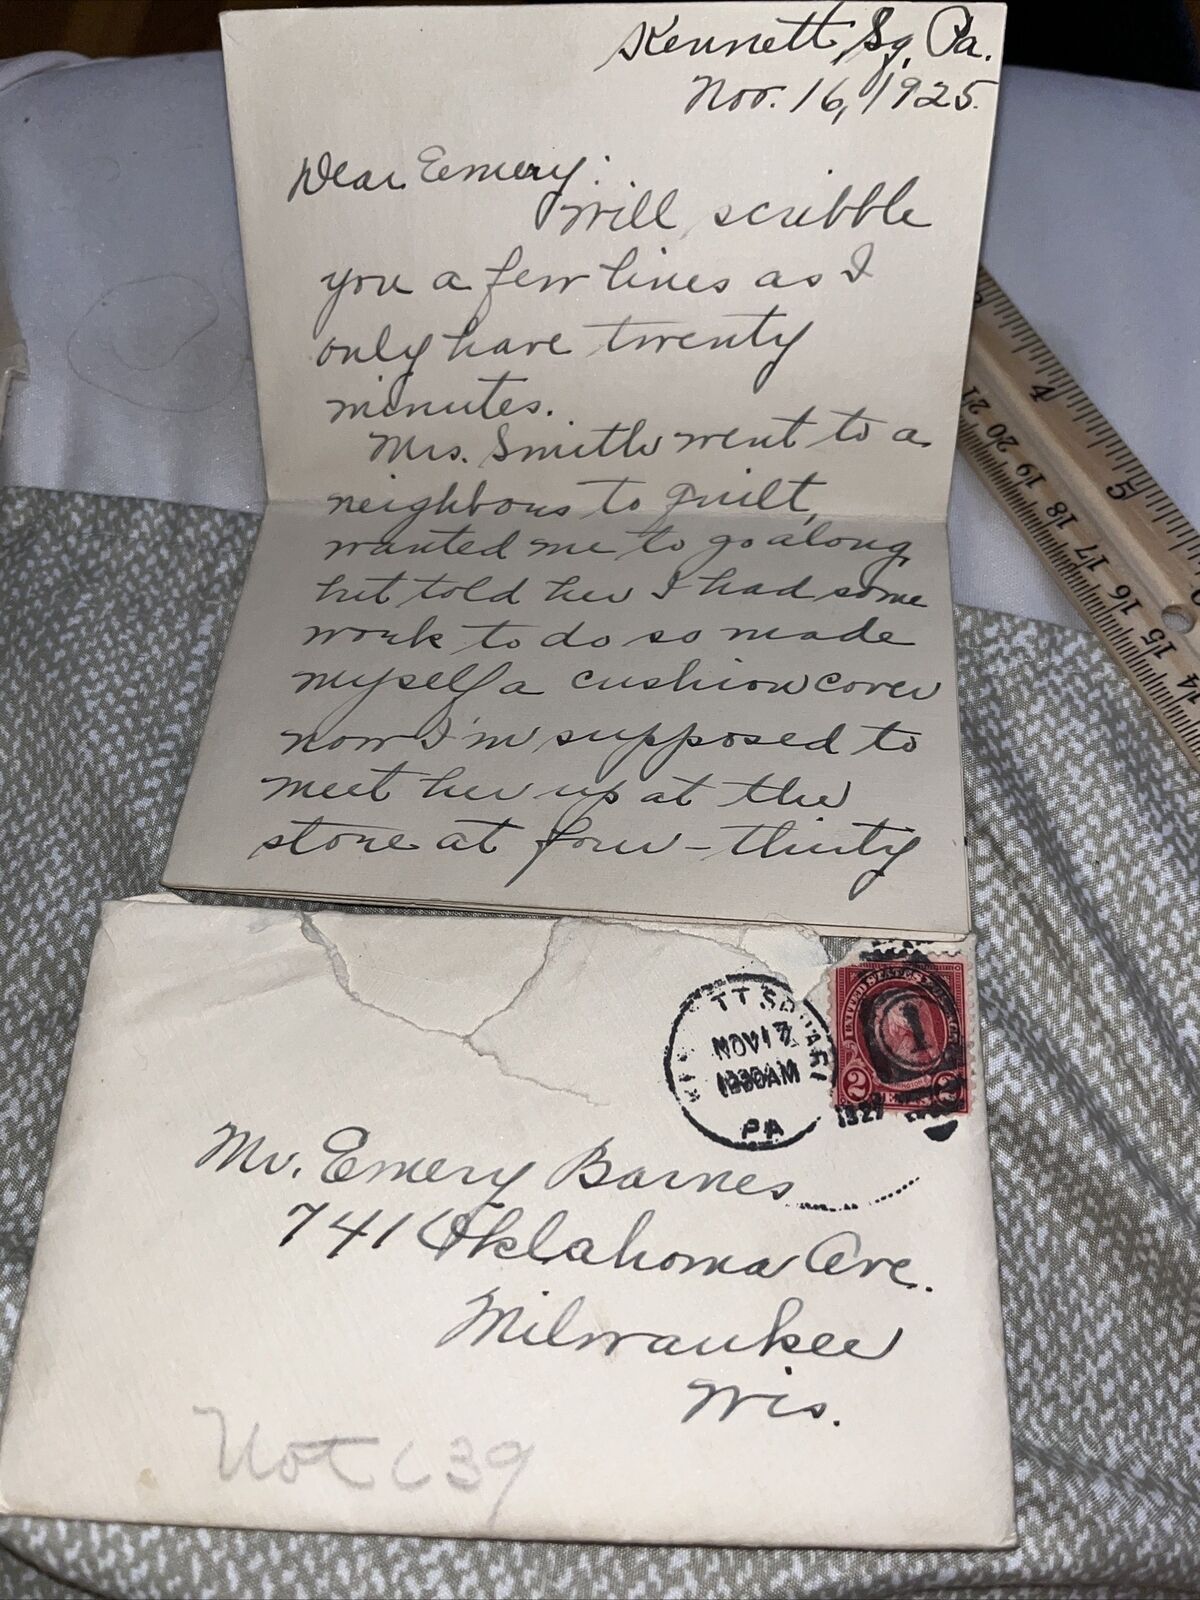 Antique 1925 Pre-Depression Era Letter Discusses Shopping from Kennett Square PA